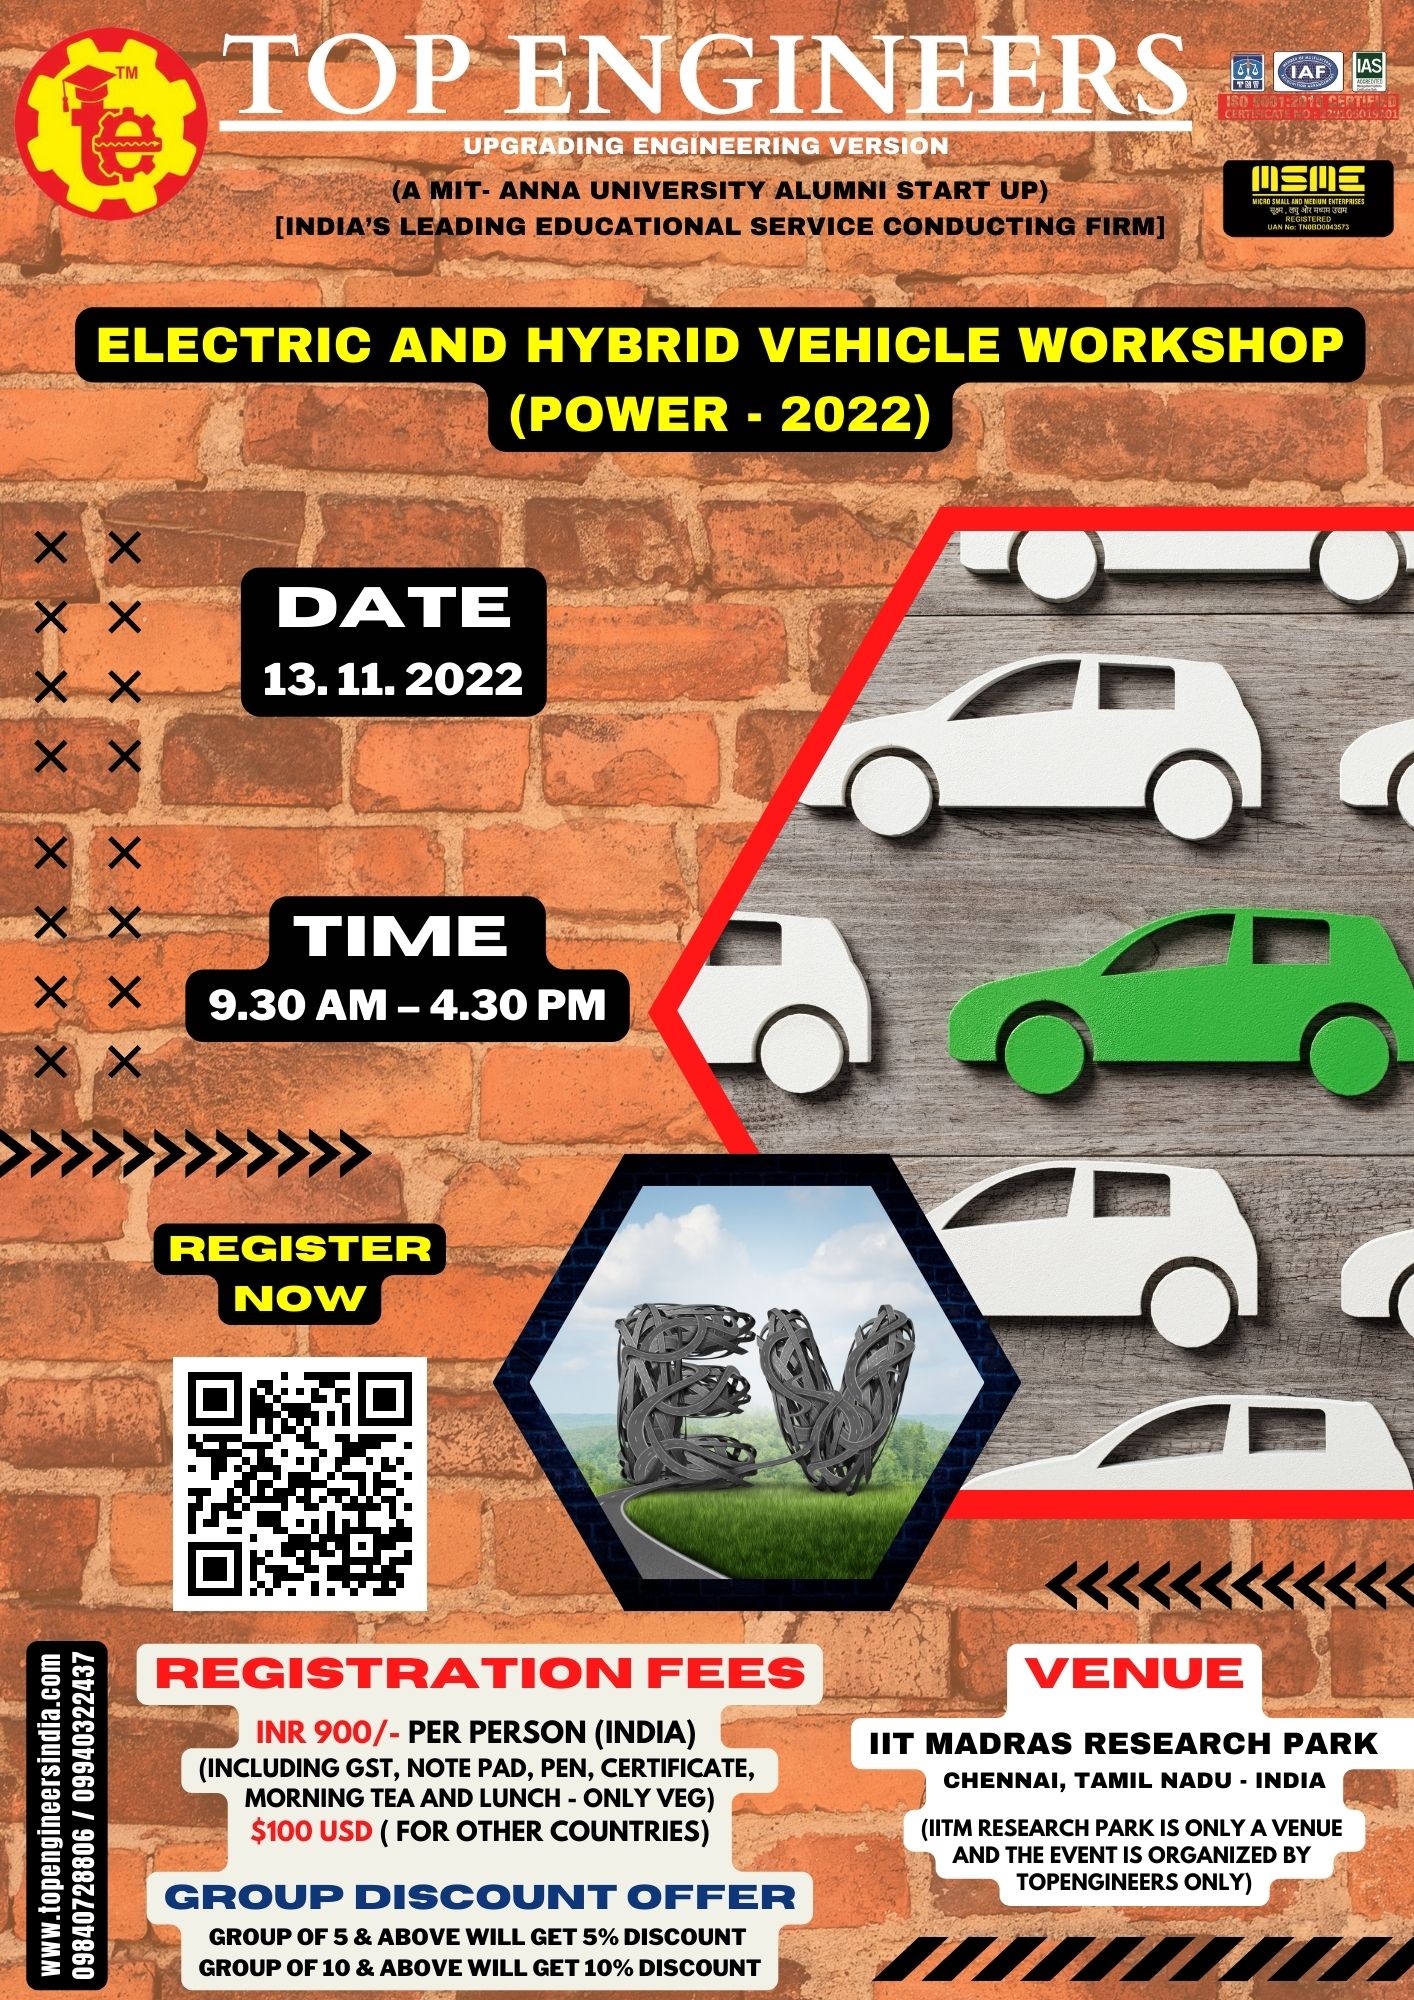 Electric and Hybrid Vehicle Workshop (Power - 2022)